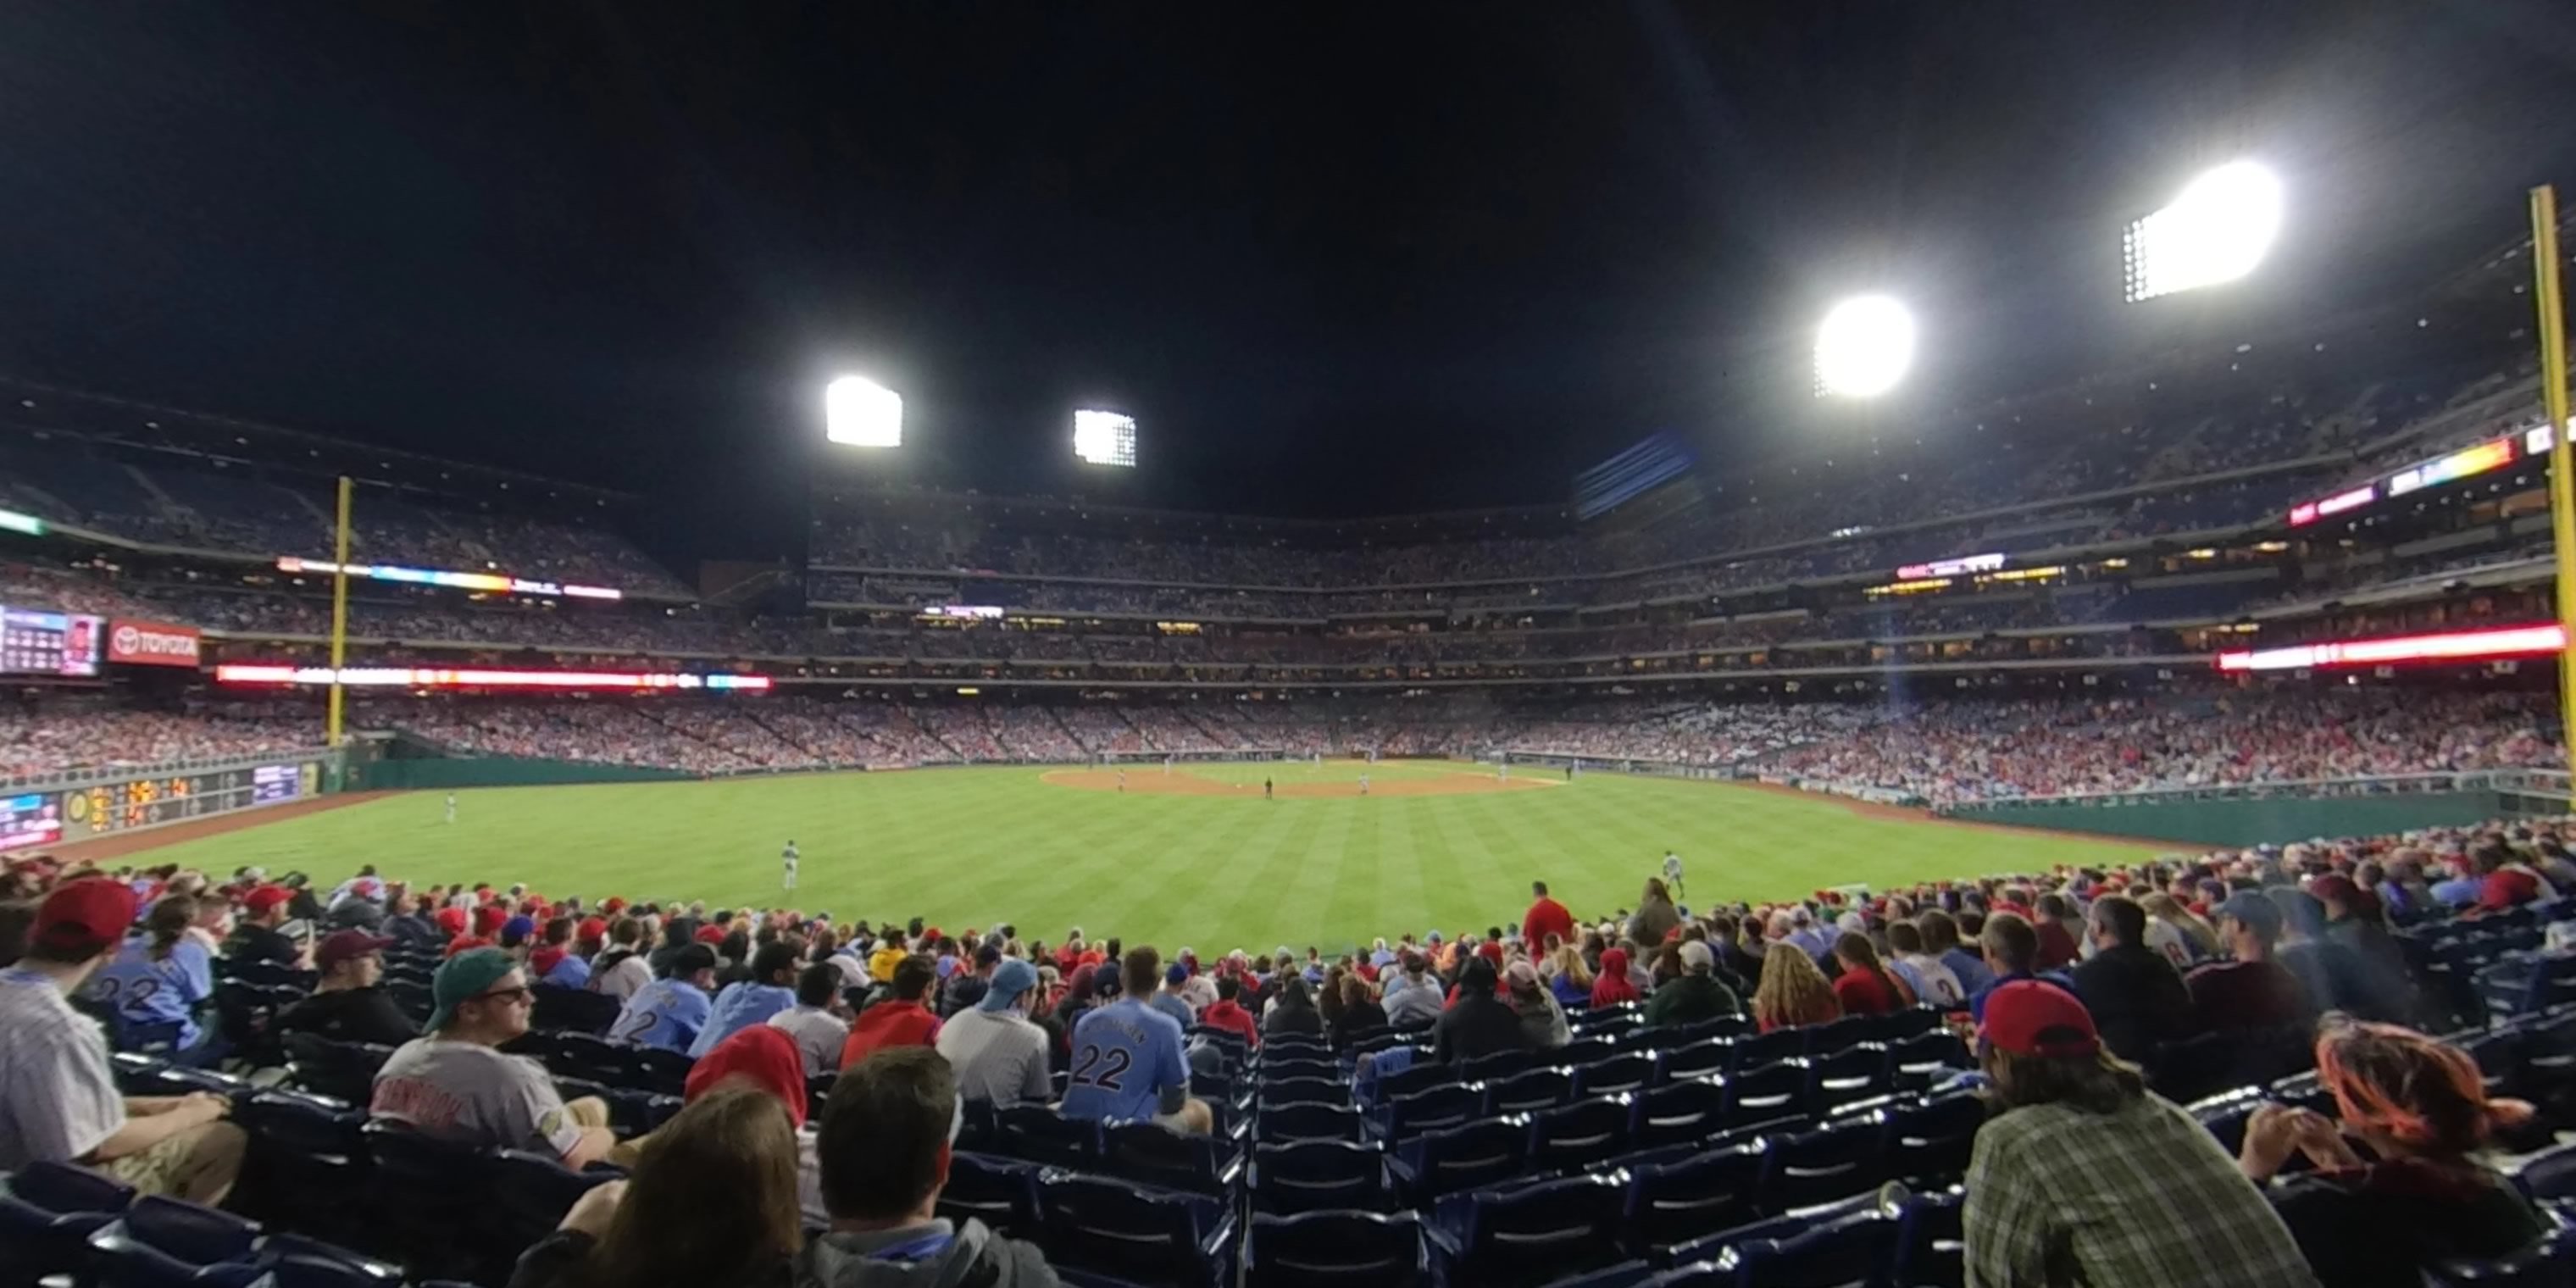 section 145 panoramic seat view  for baseball - citizens bank park